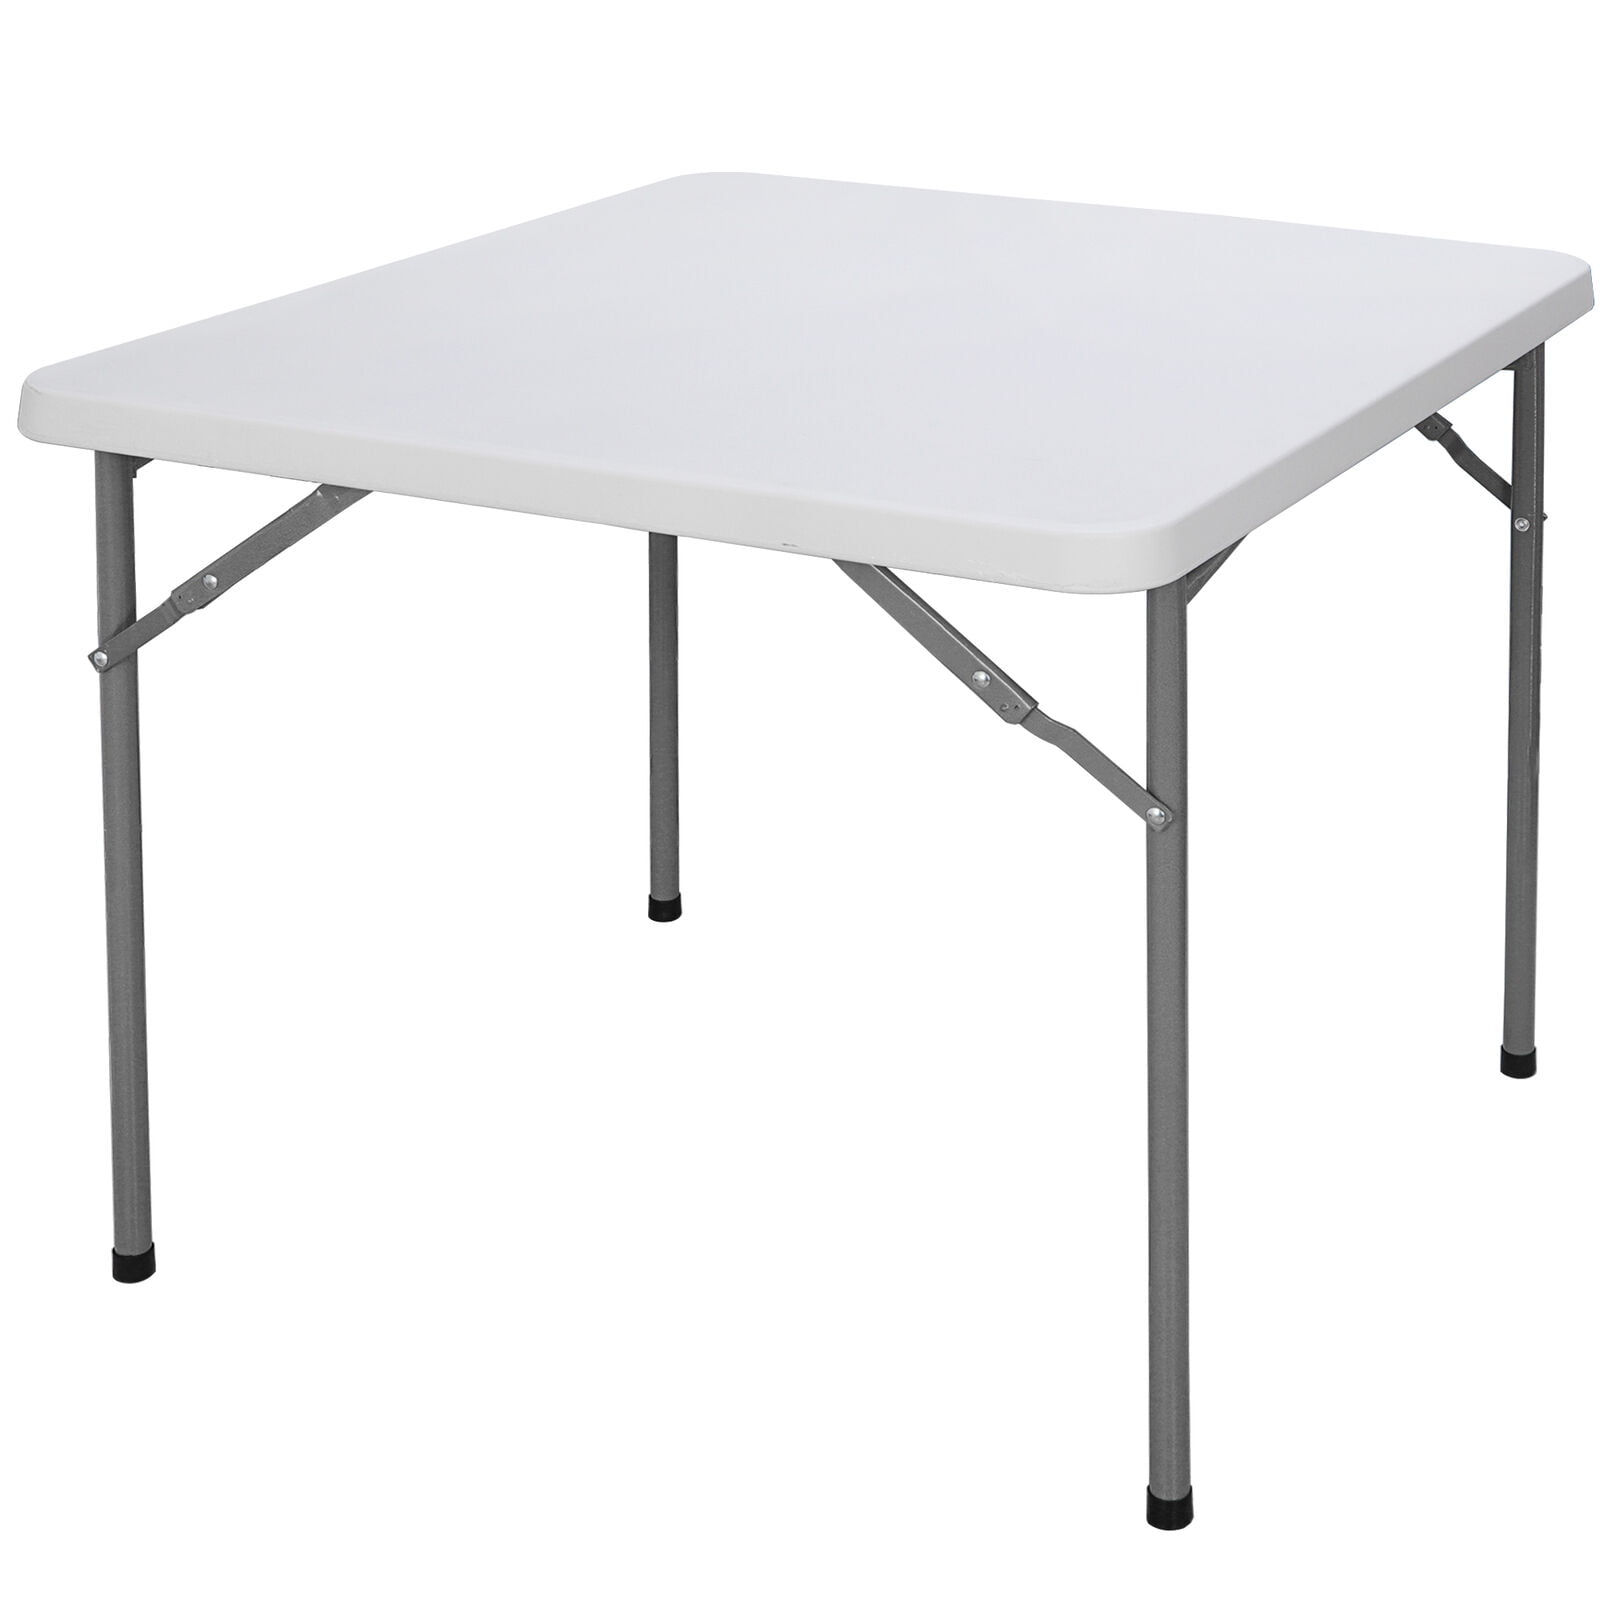 Details about   Multipurpose 3ft Square Card Table Garden Yard Beach Indoor Home Lunch Garden 